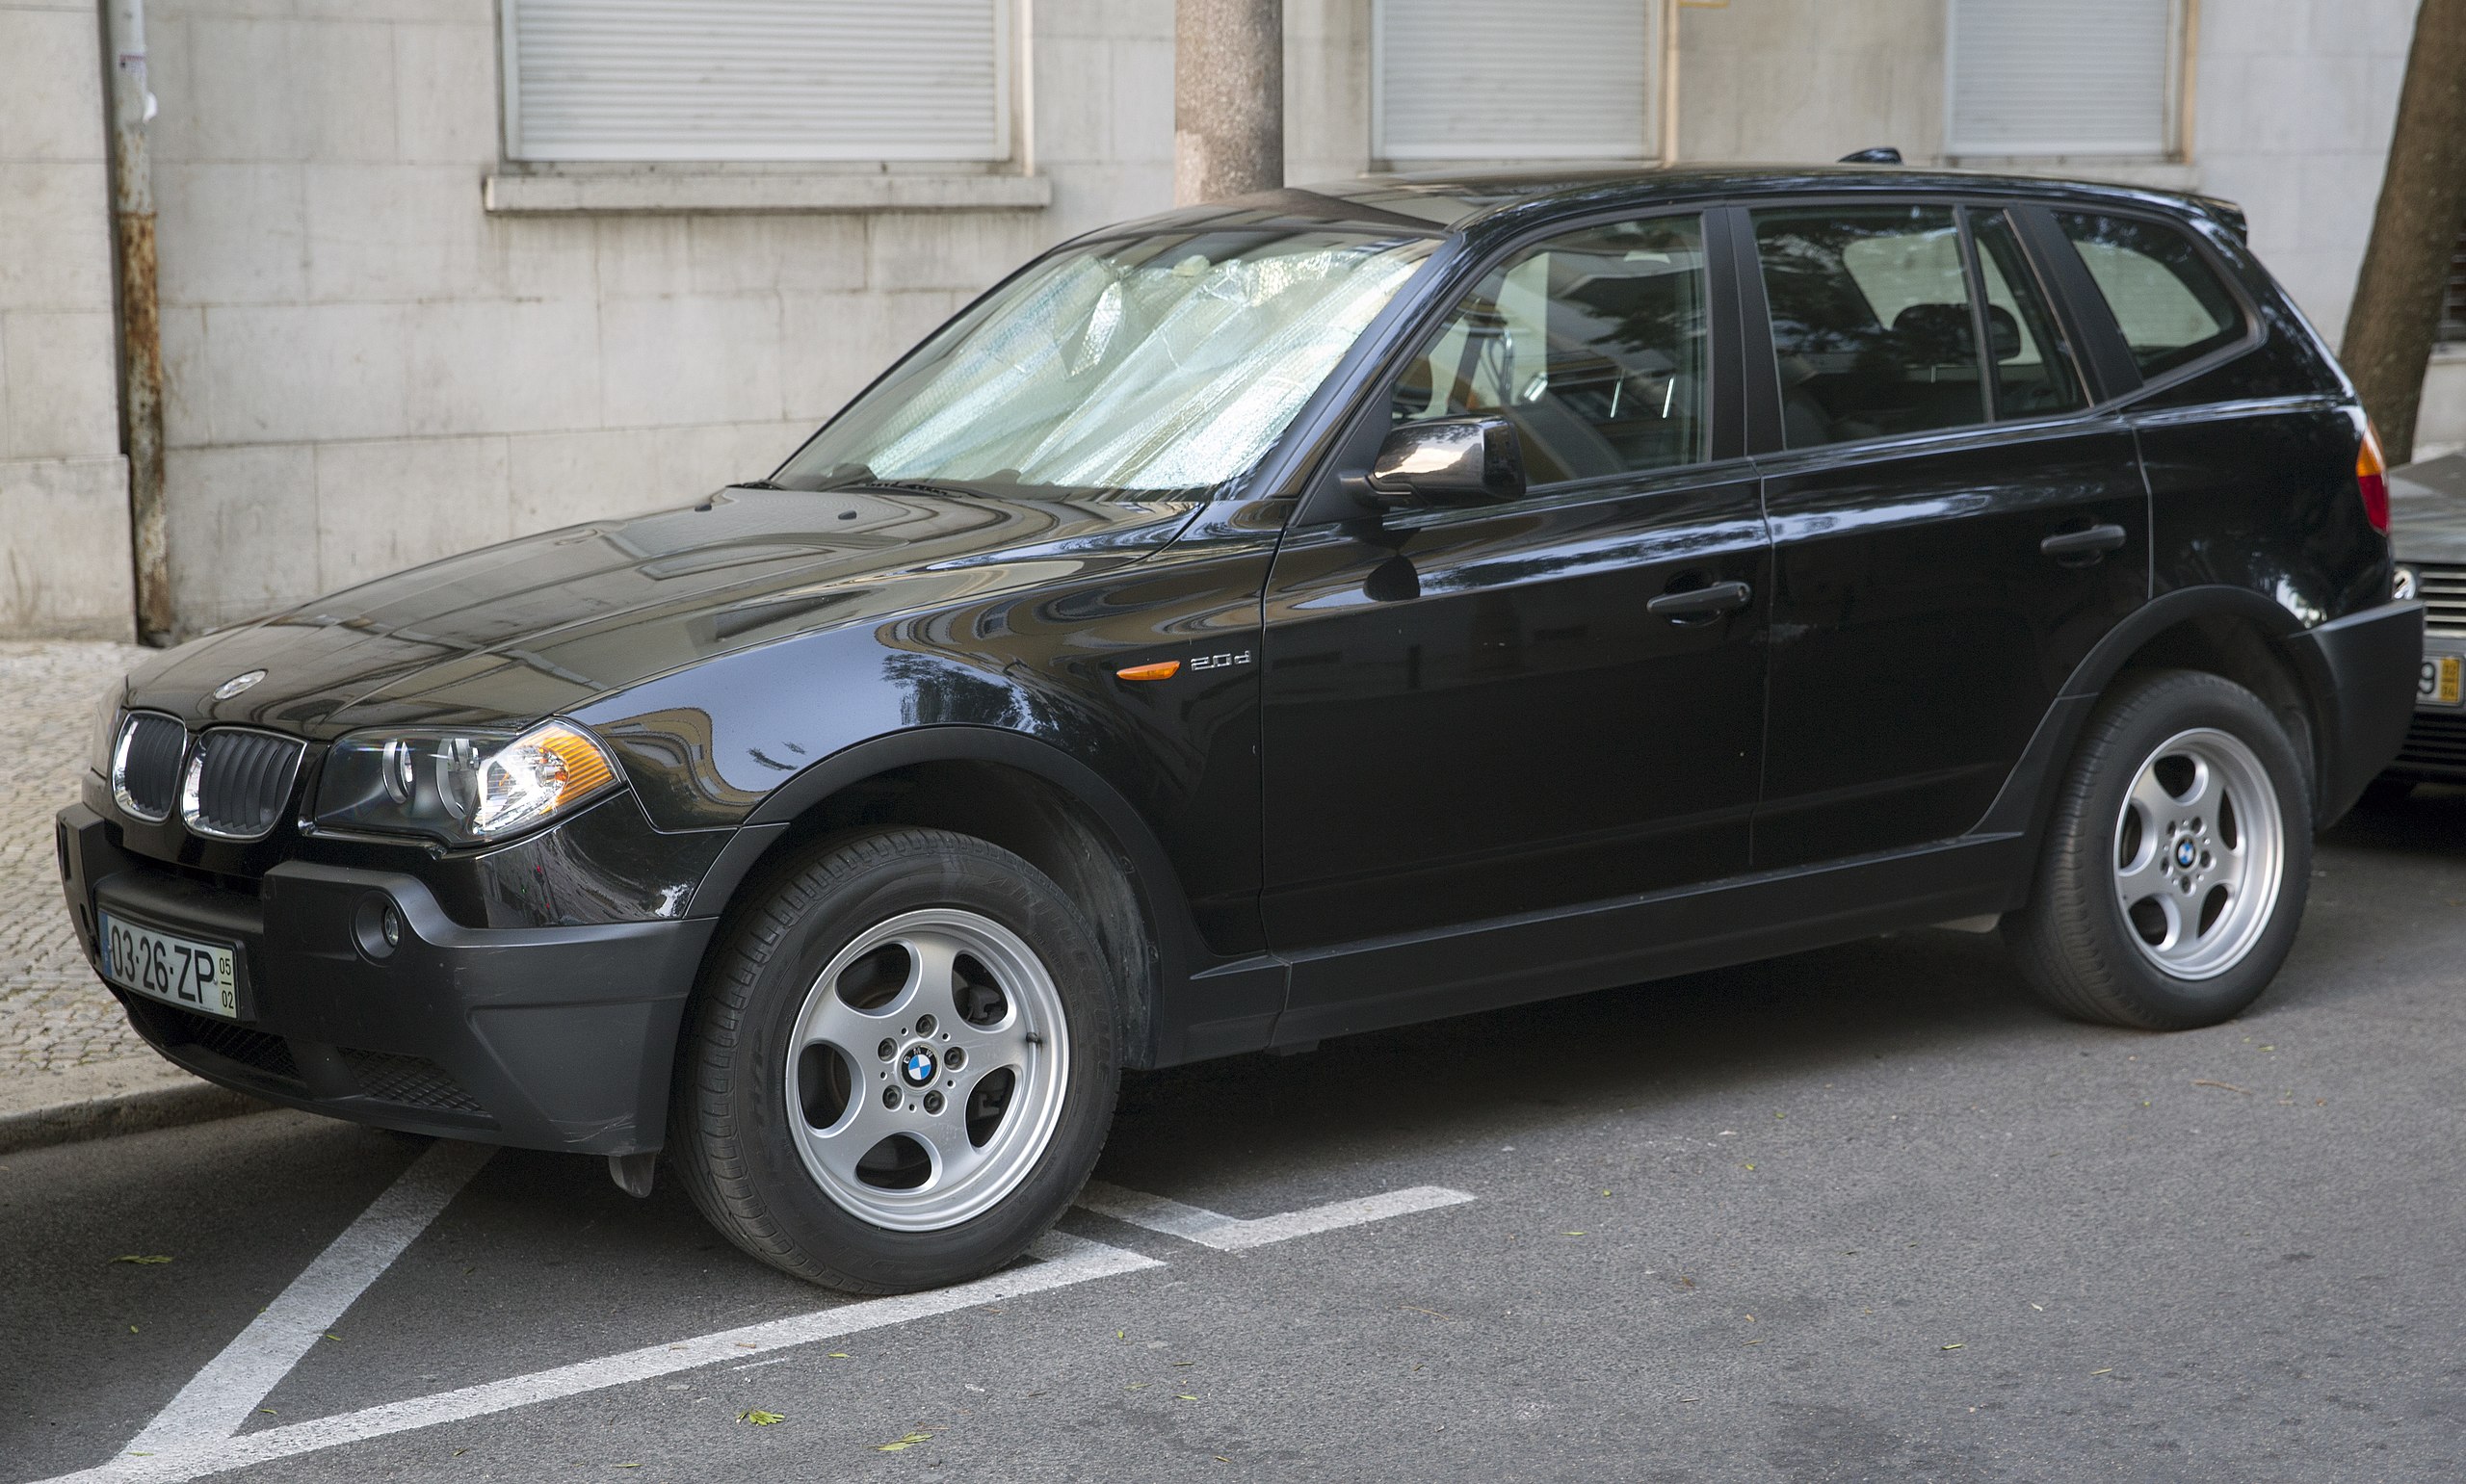 File:2005 BMW X3 2.0d, front left (Portugal).jpg - Wikipedia